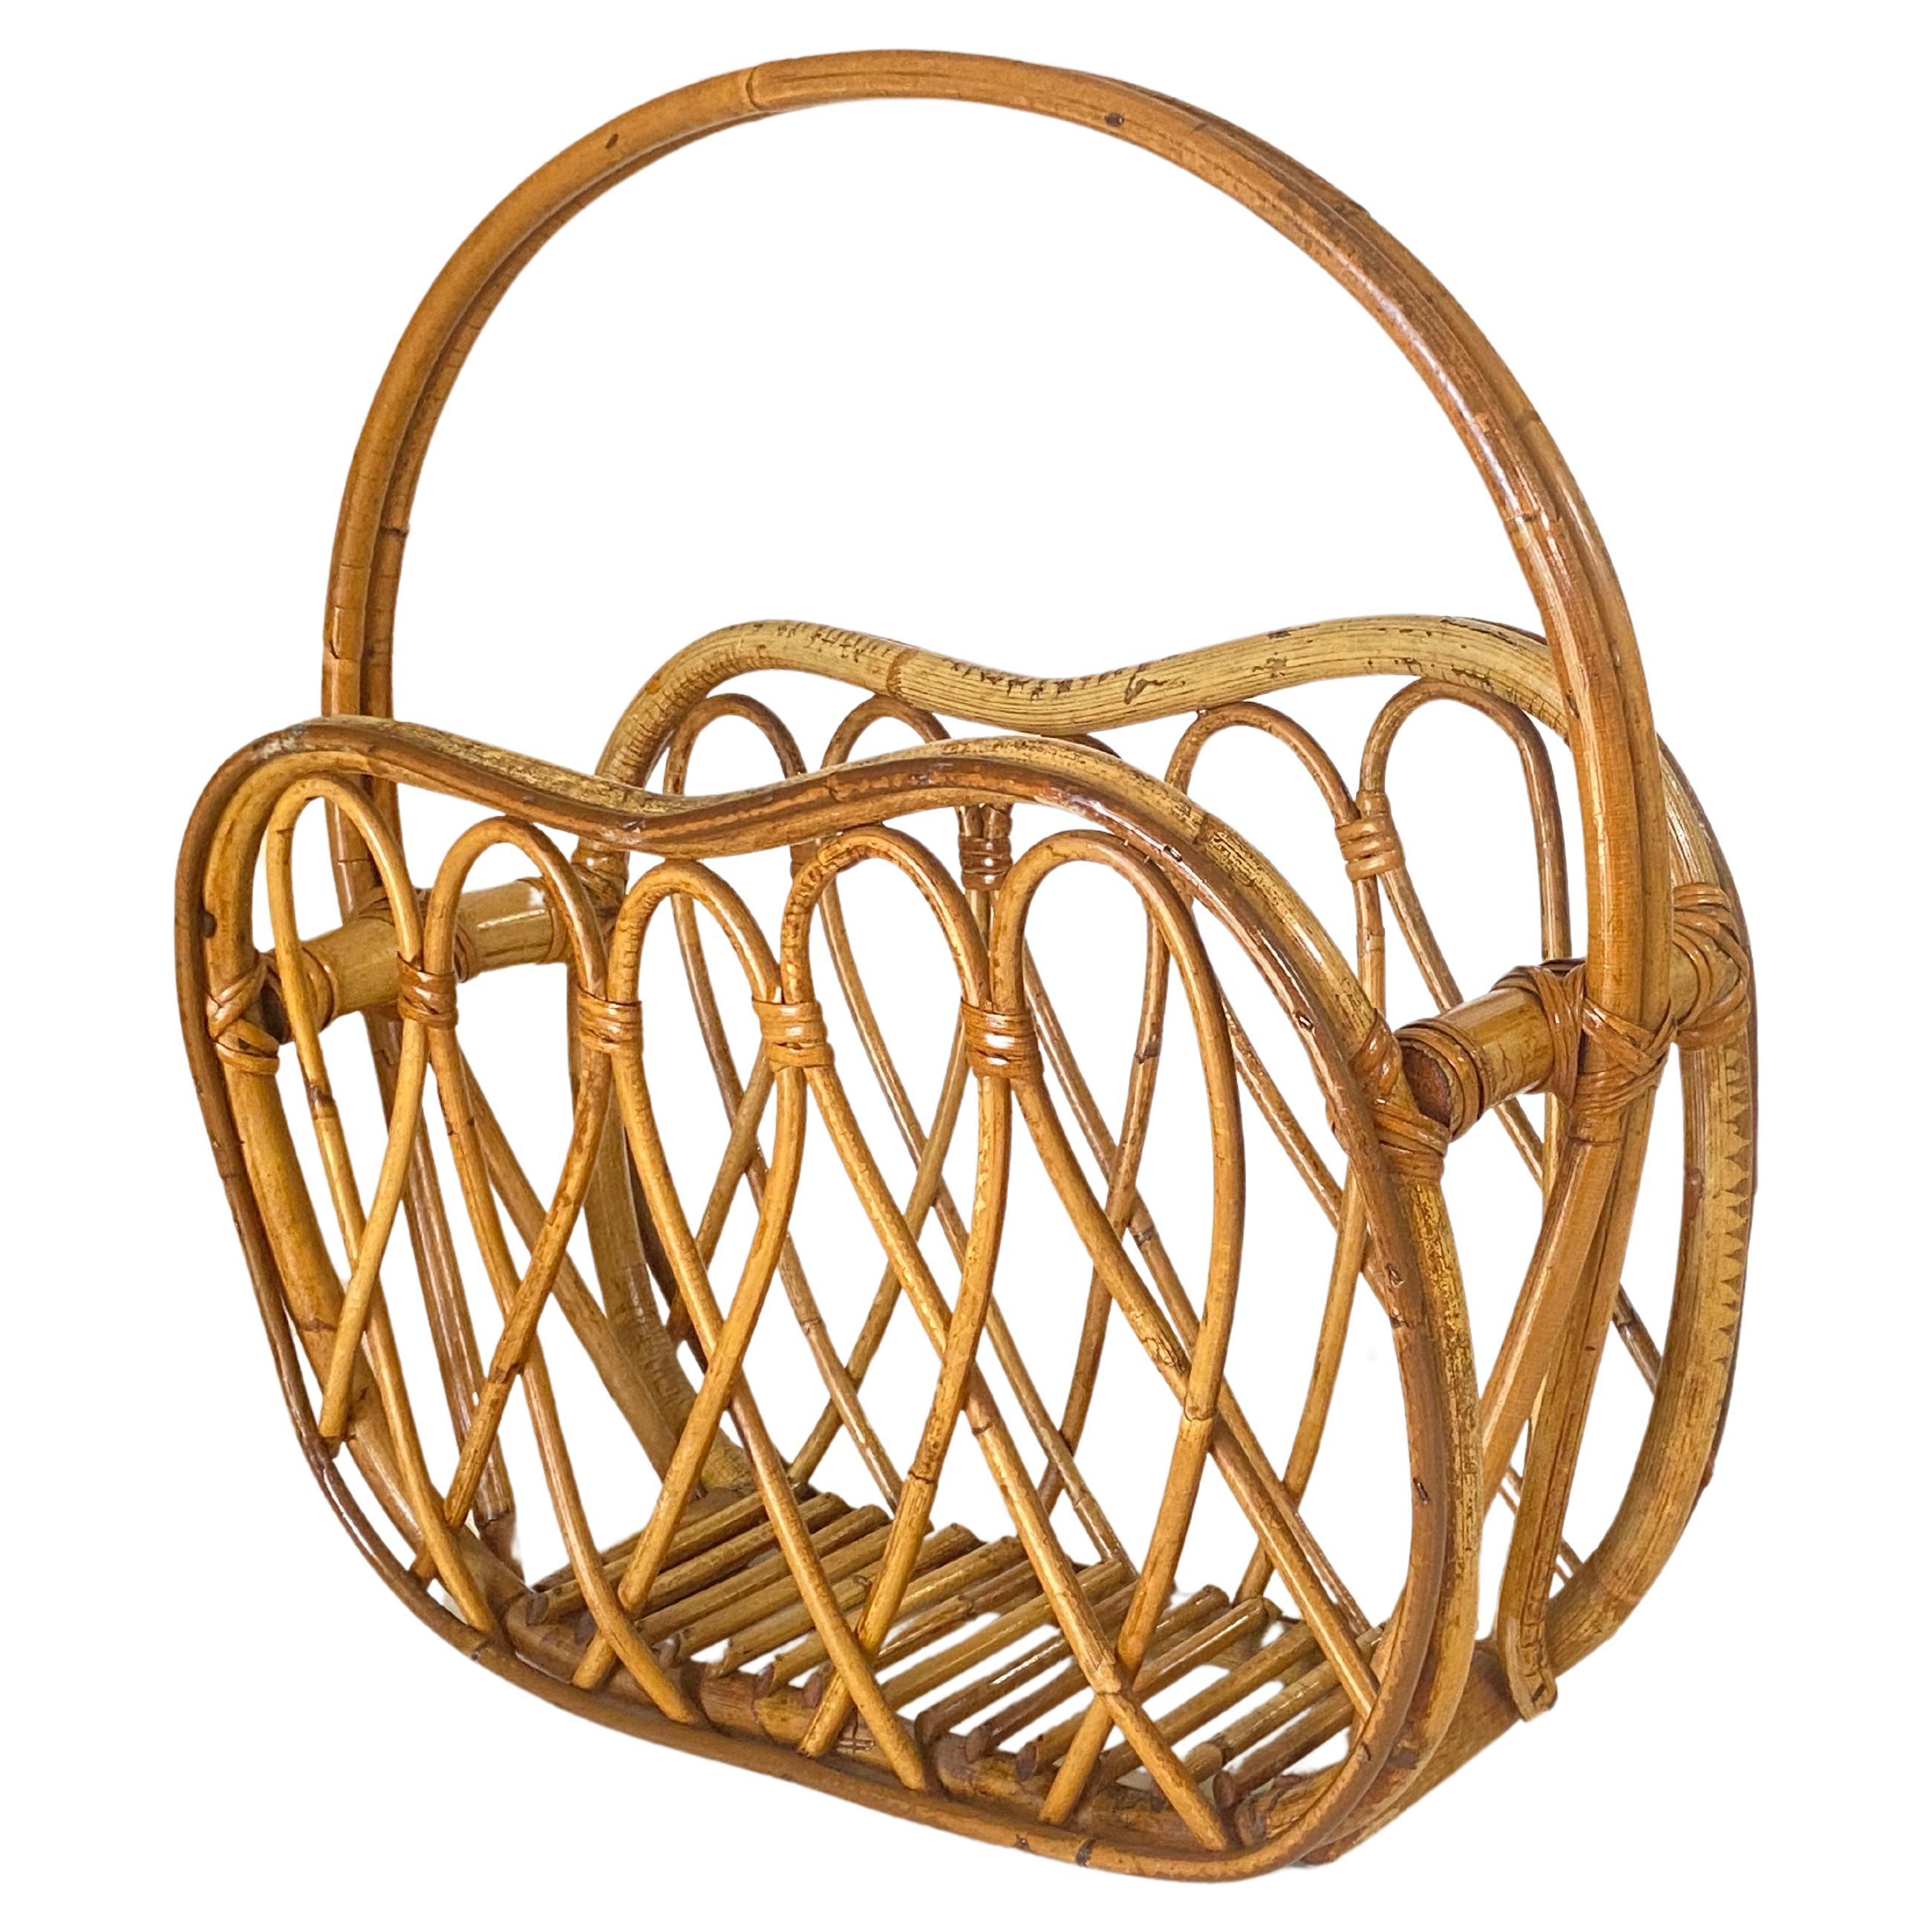 This vintage mid-20th century Italian raised magazine stand with a round handle is handcrafted in natural rattan, beautifully and carefully bent to make an elegant curved design and decor all around. The ease of carrying and moving this piece makes